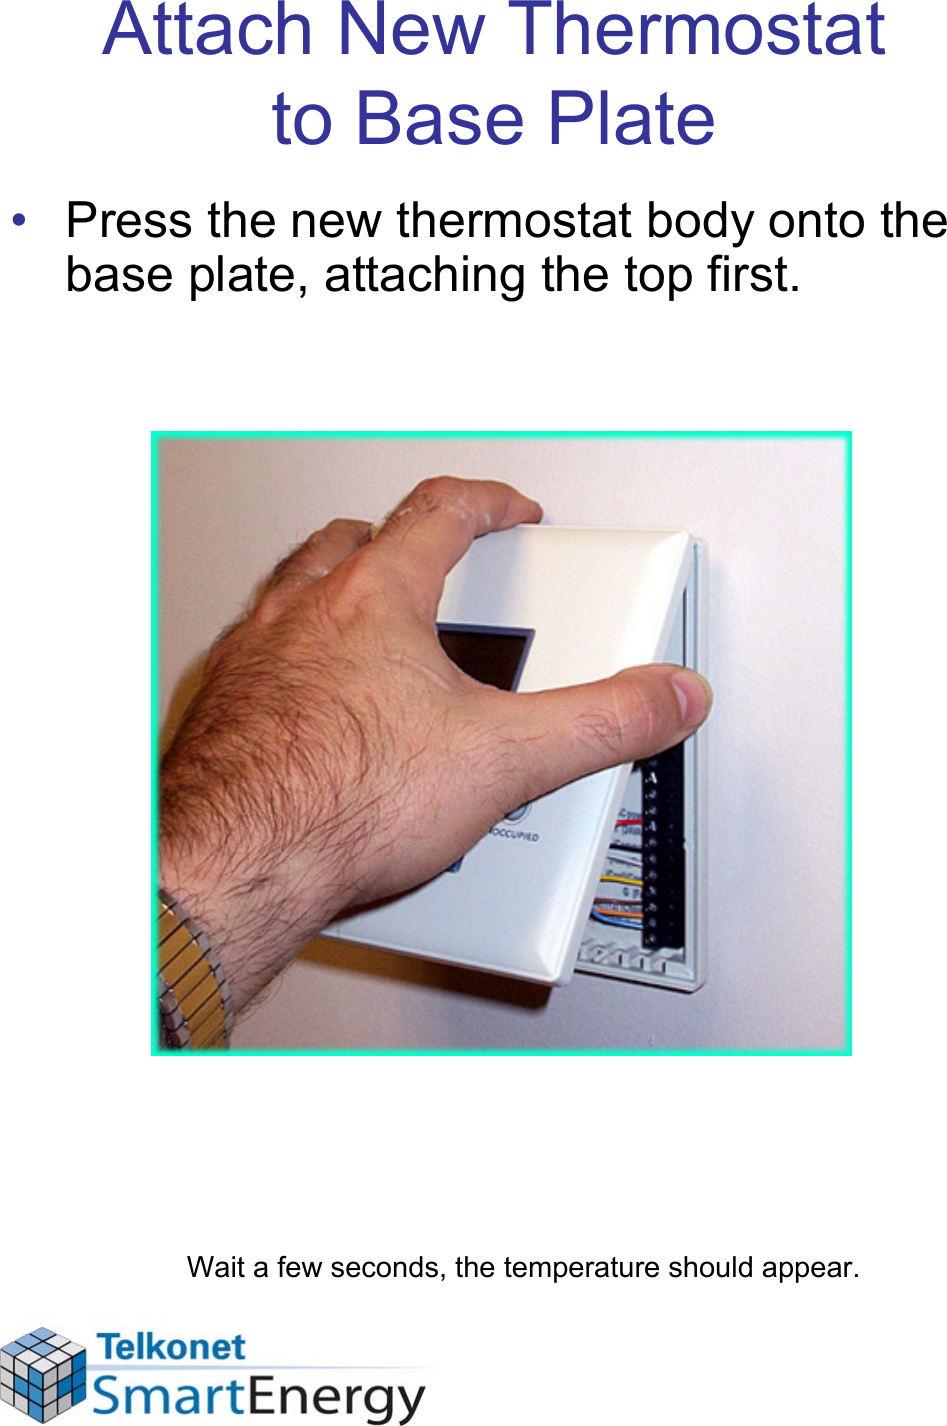 Attach New Thermostat to Base Plate• Press the new thermostat body onto the base plate, attaching the top first.Wait a few seconds, the temperature should appear.